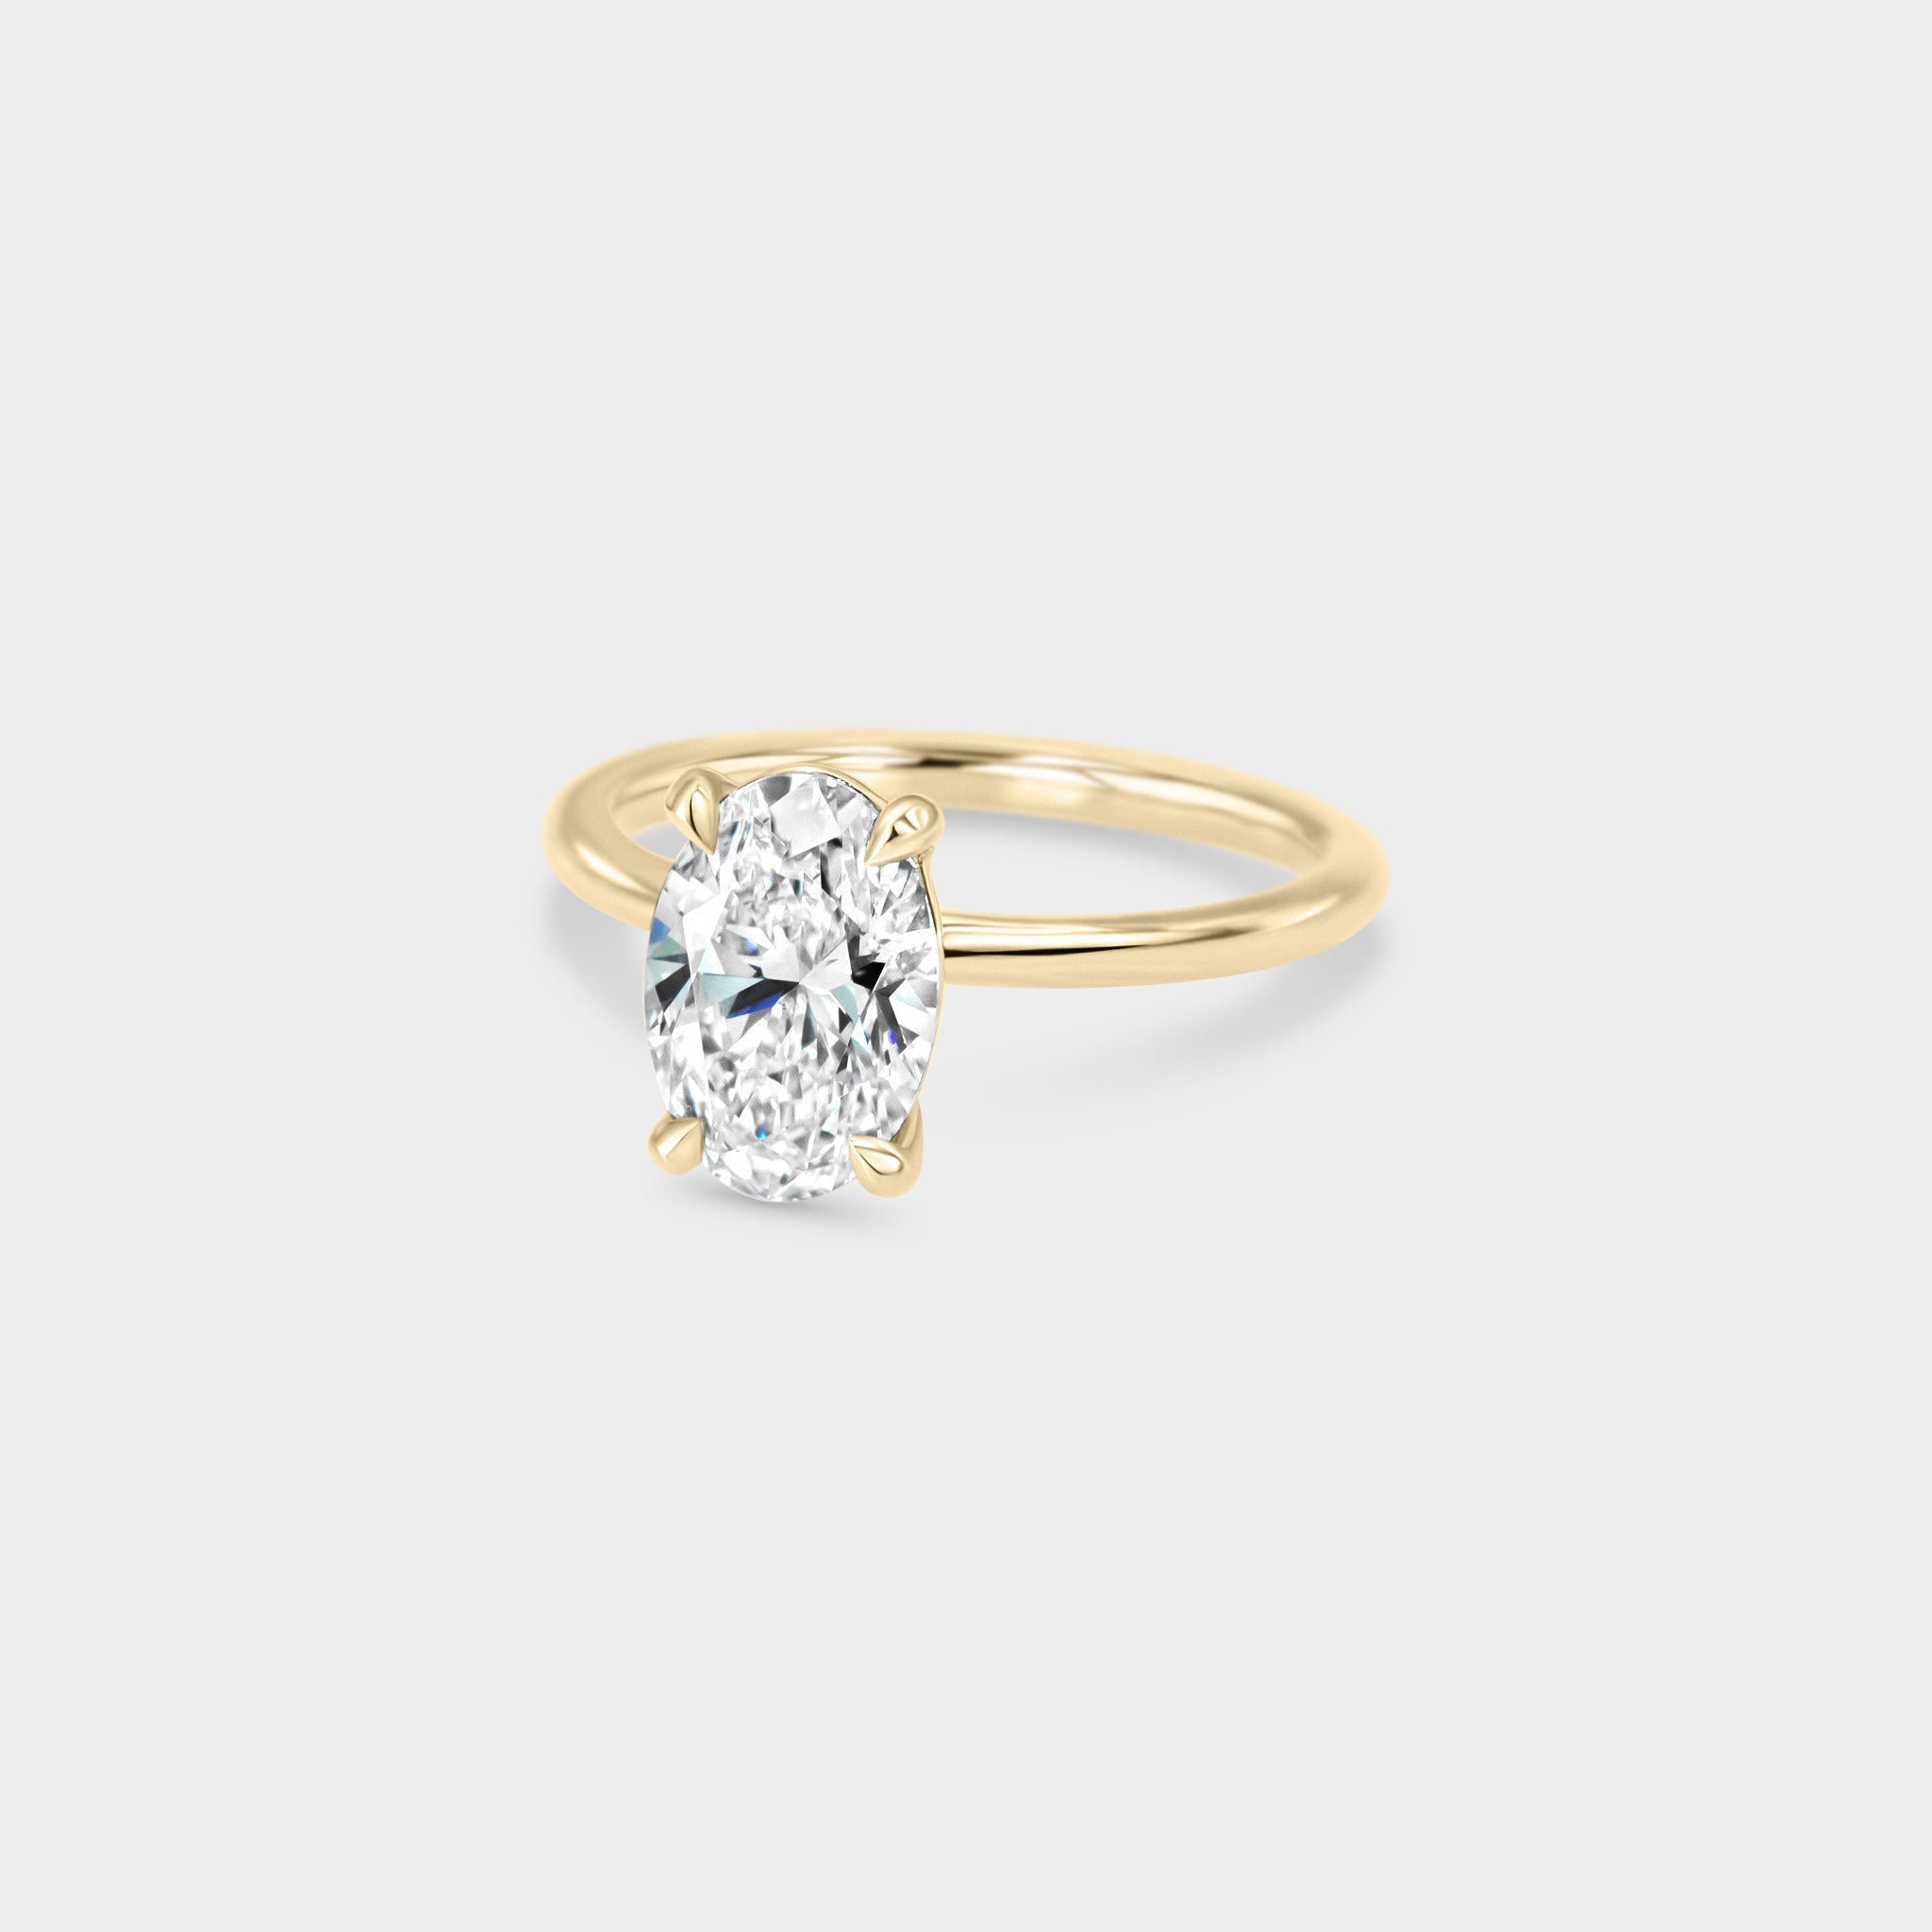 Solitaire of LAB GROWN Oval Diamond - Laher -